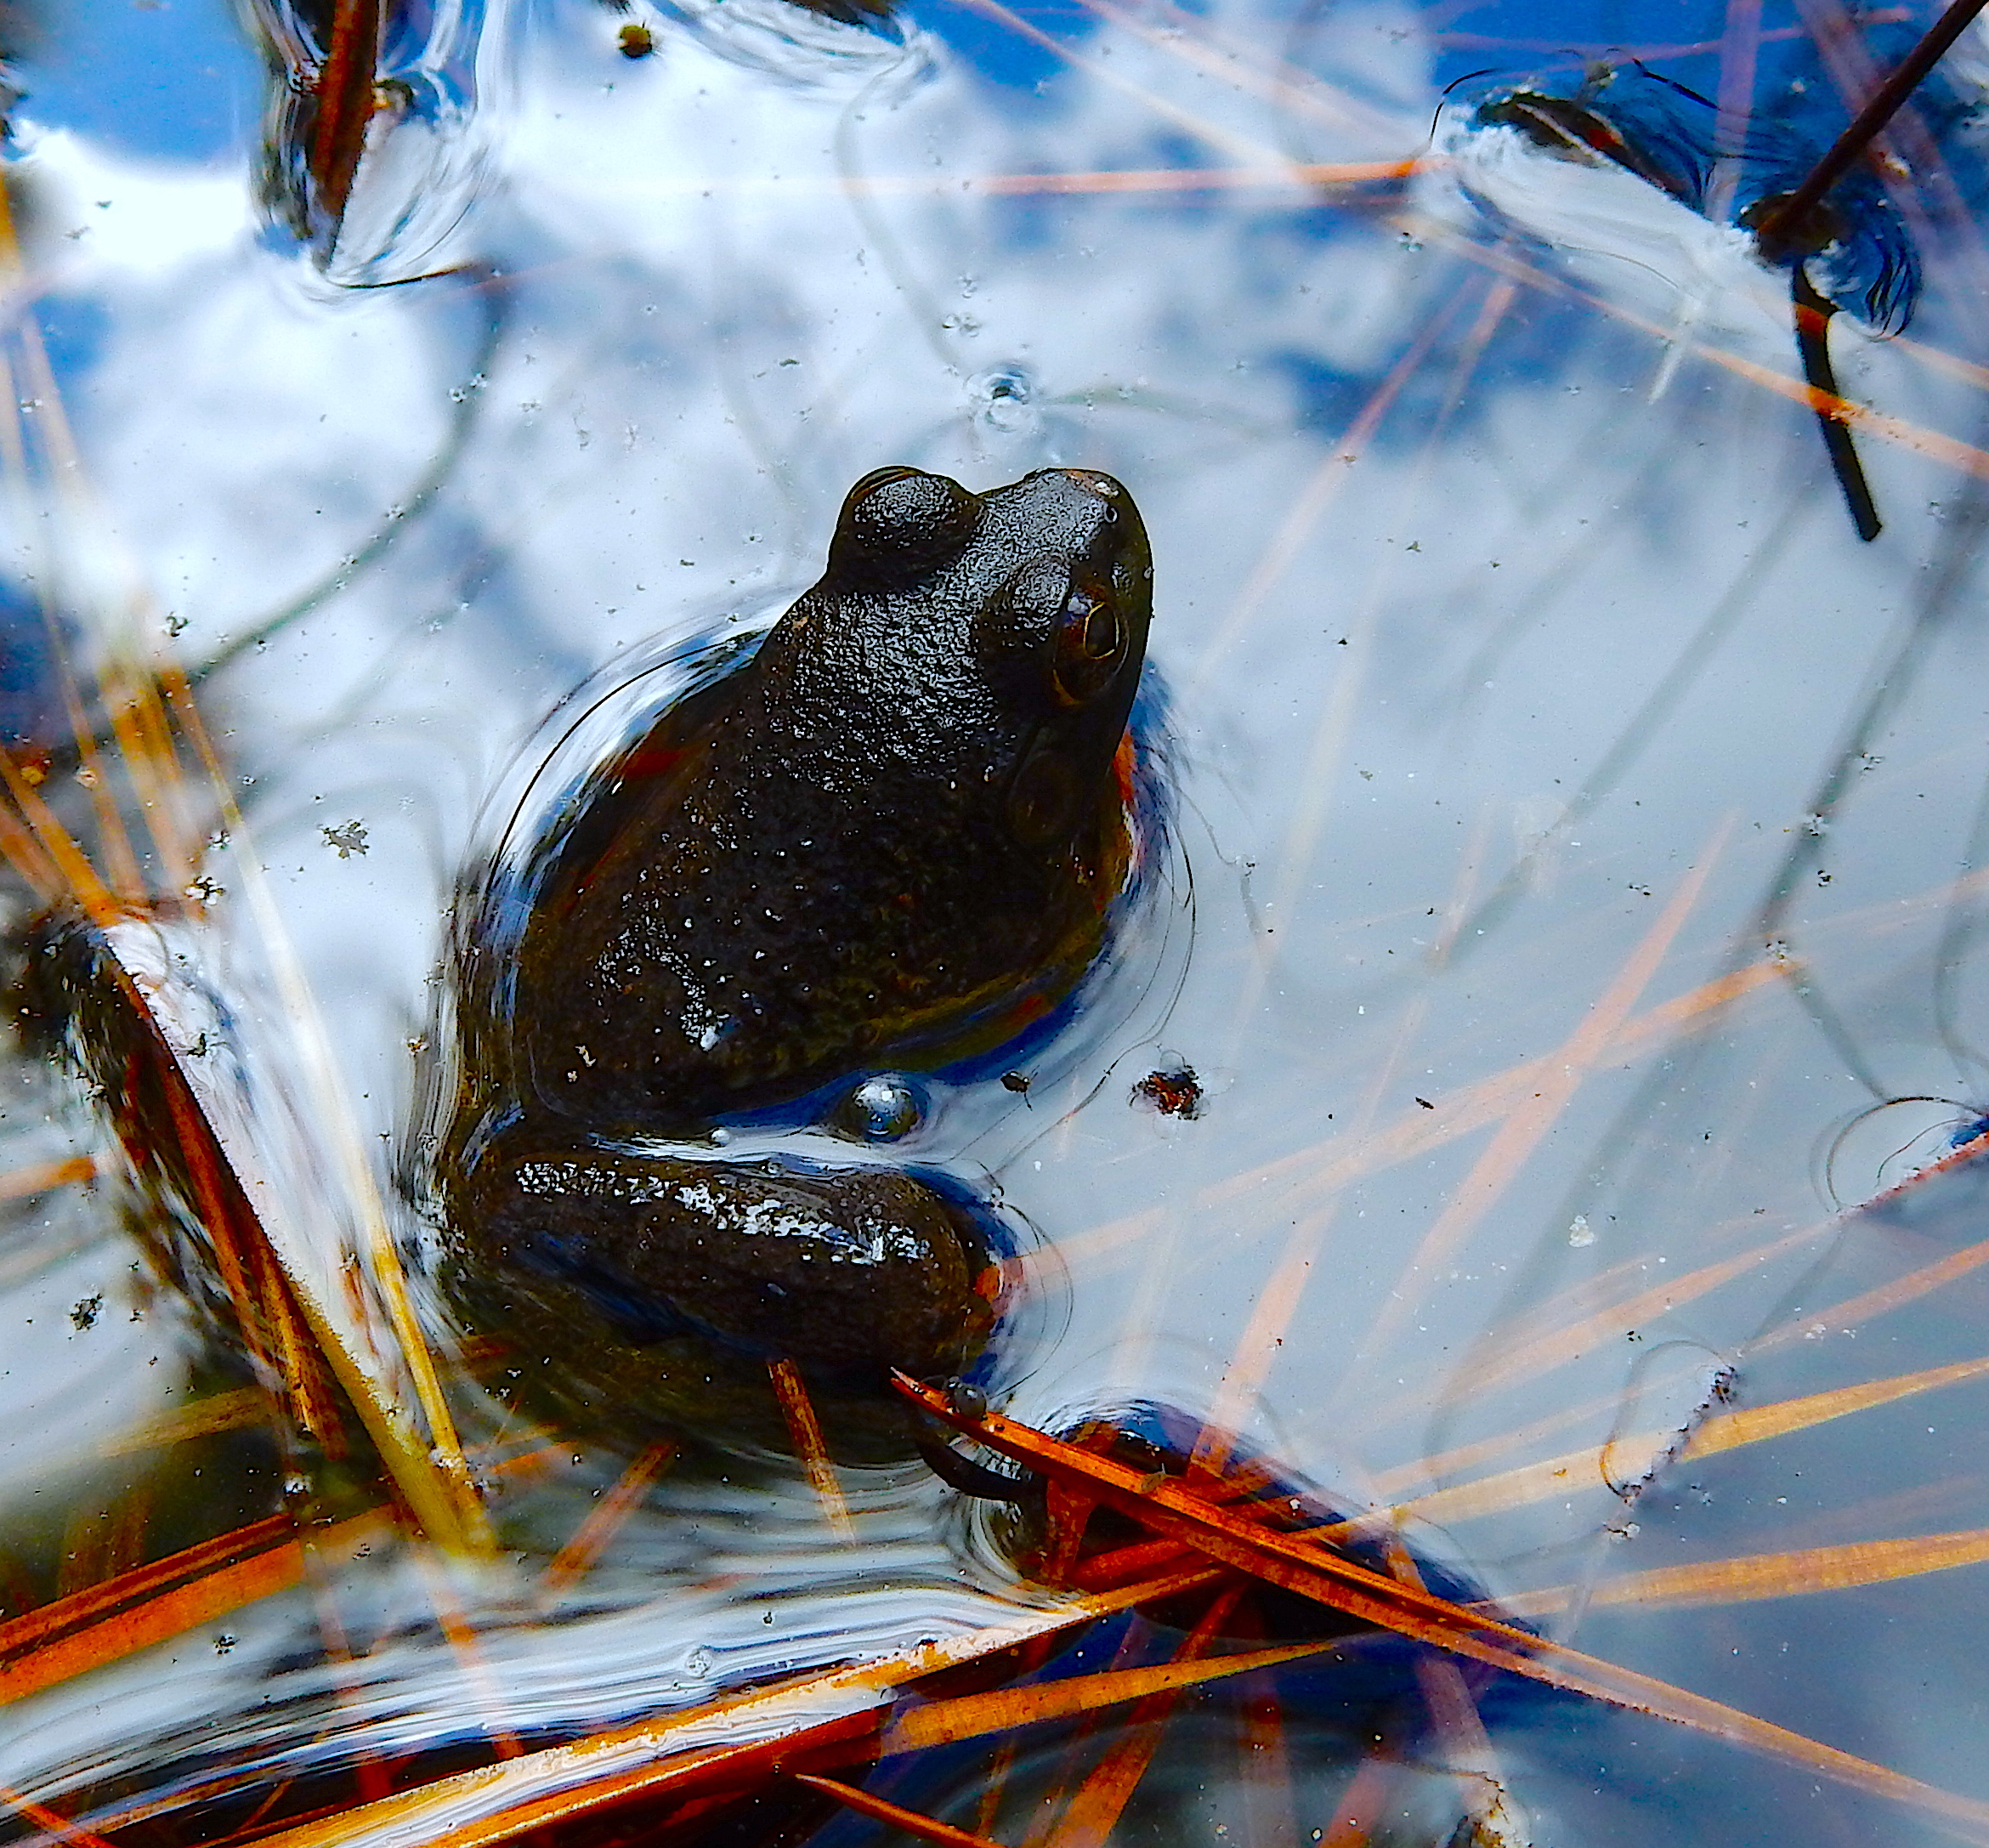 image: frog. Credit: NC Wetlands/CC-BY-2.0.